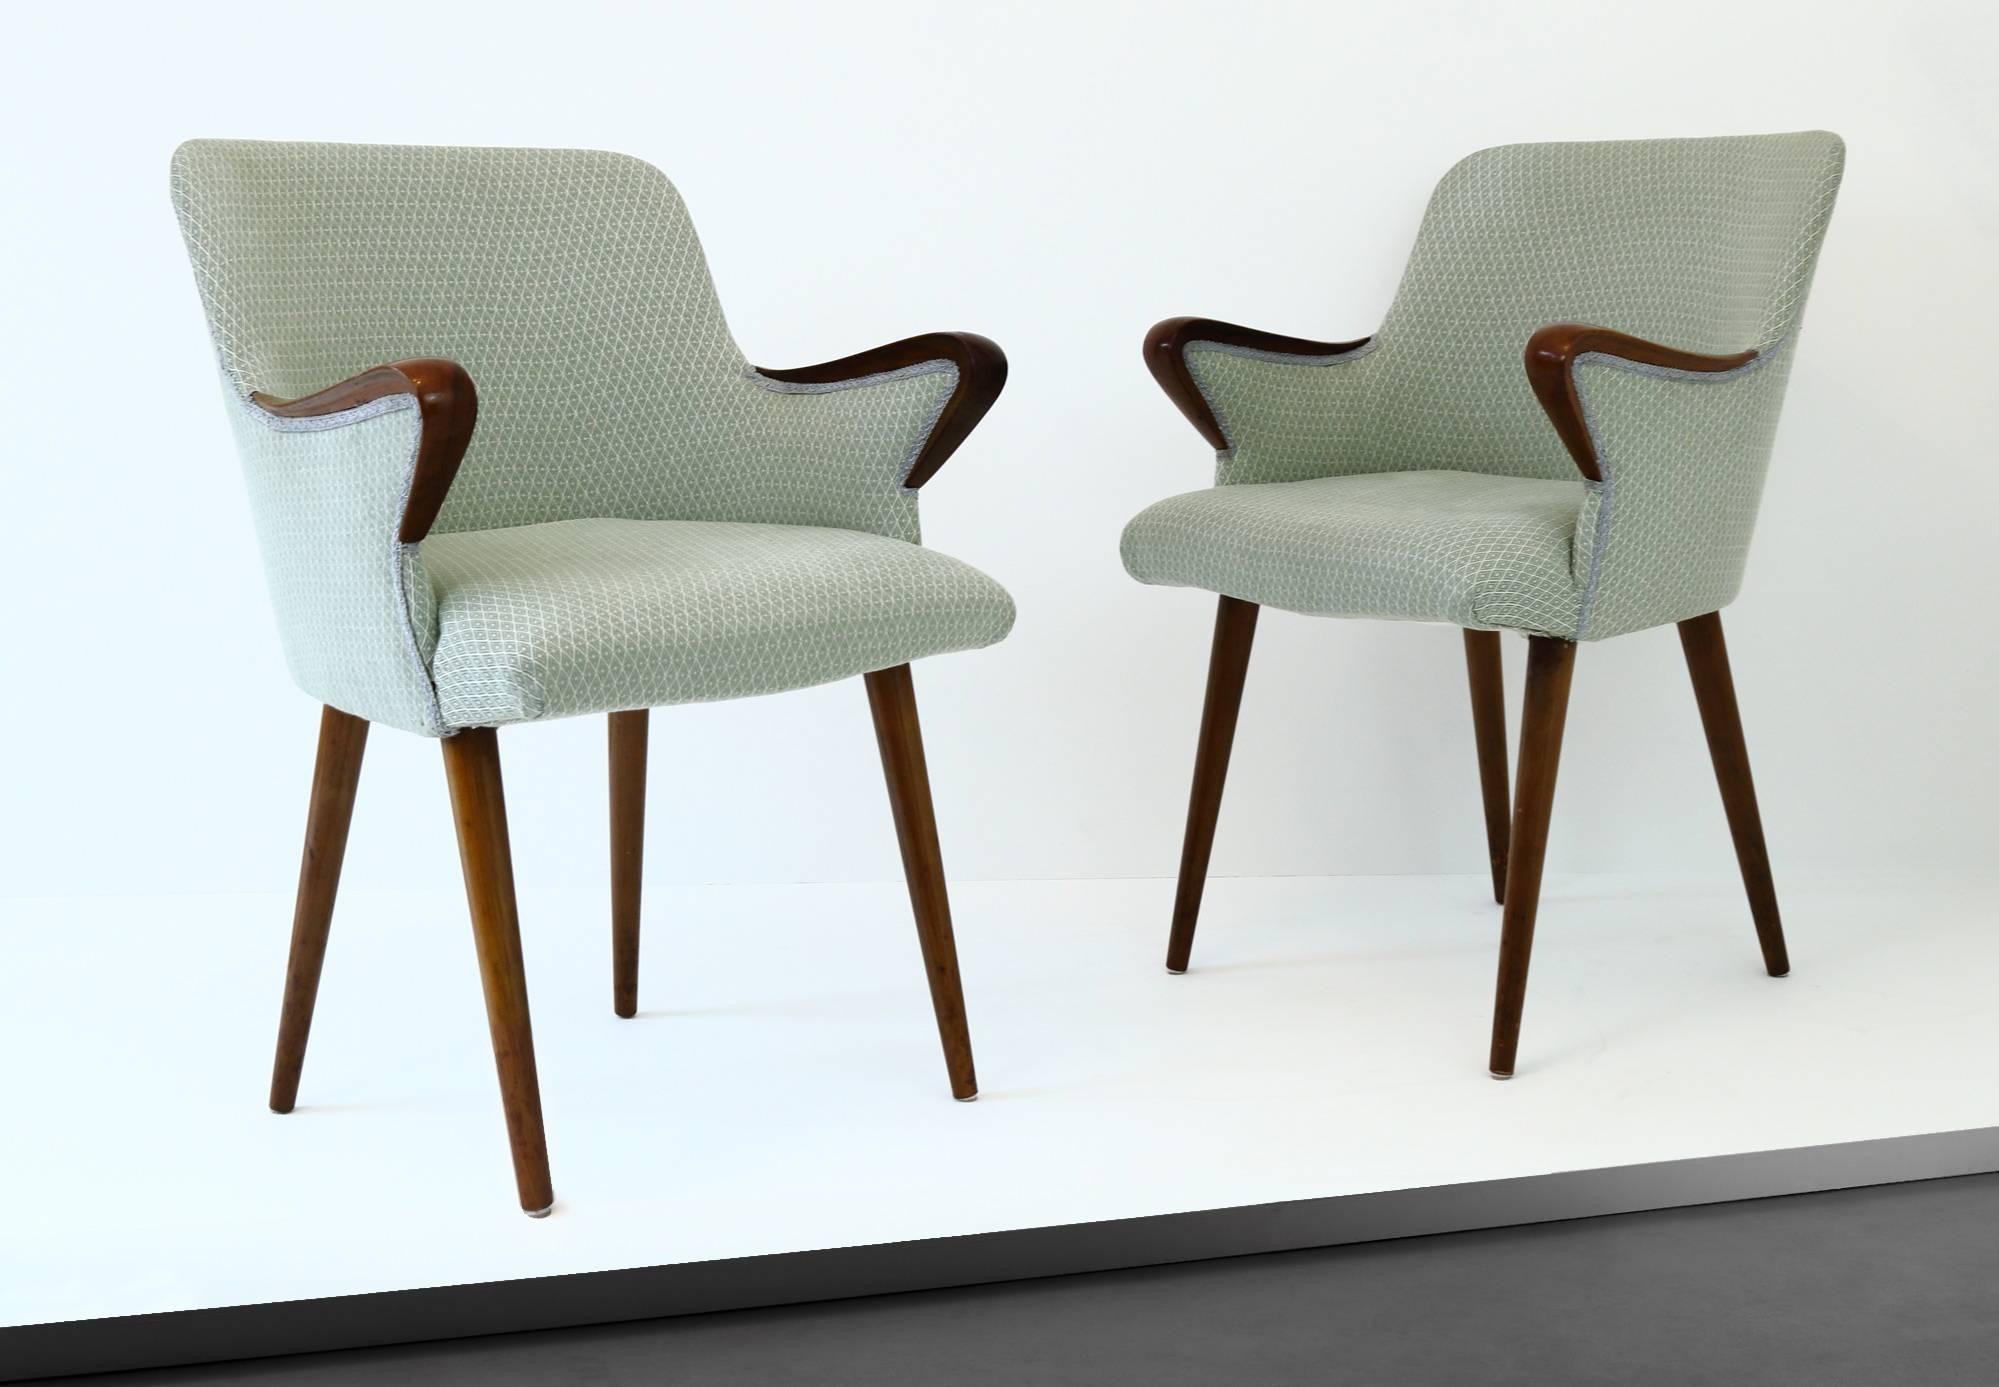 A fantastic pair of P38 chairs in beech, upholstered in a patterned, pastel green, vintage fabric. Designed by Borsani in 1953 for Techno, the P38 chair features beautifully curved armrests that seem to protrude from within the frame. The seat